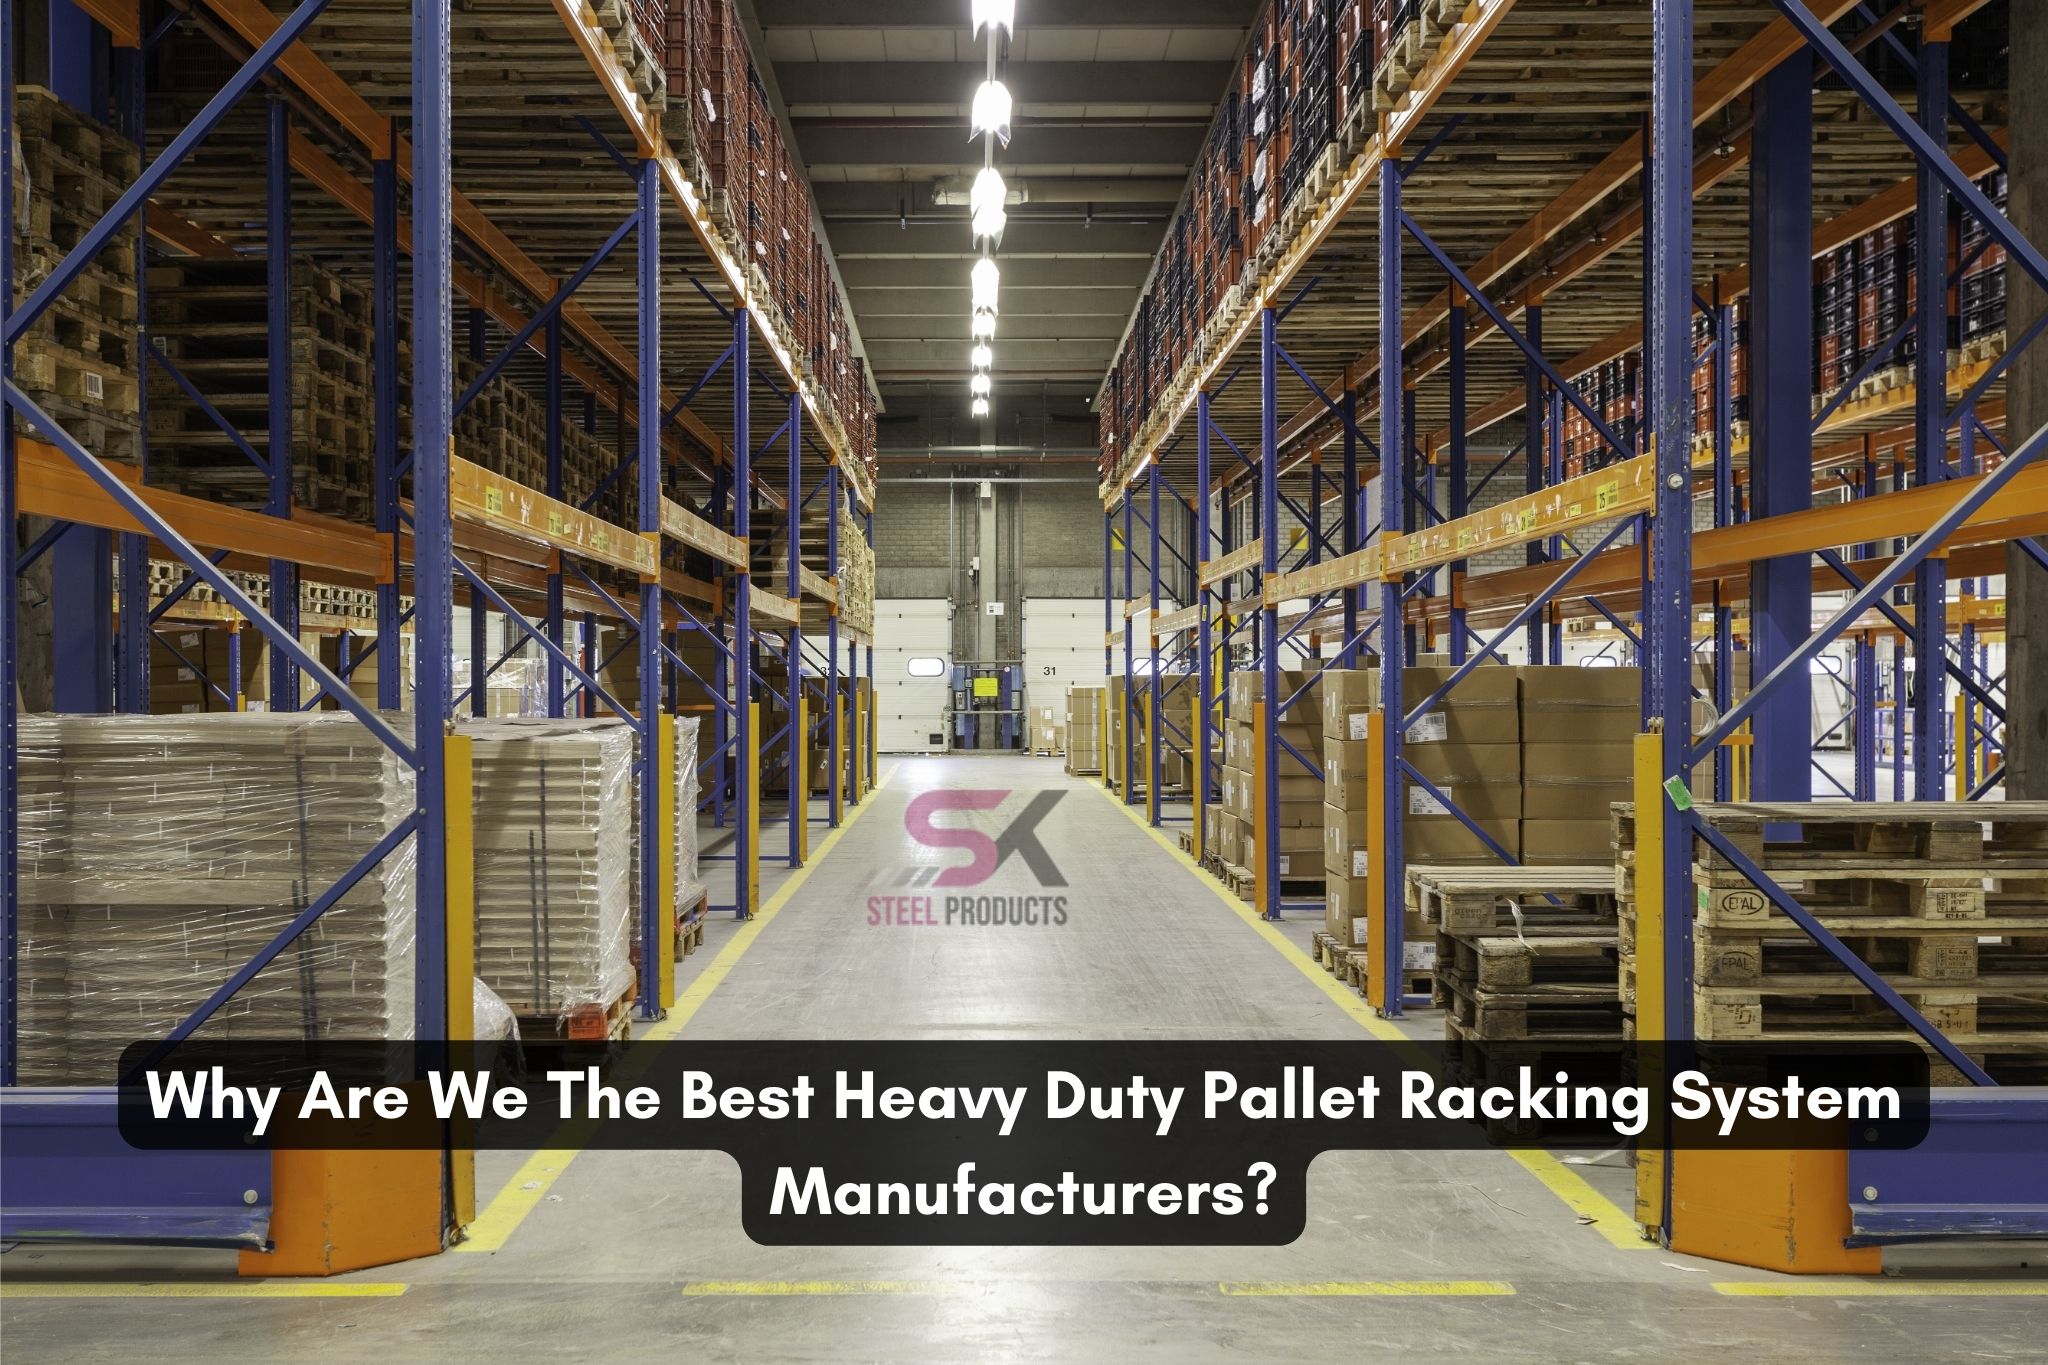 Why Are We The Best Heavy Duty Pallet Racking System Manufacturers?